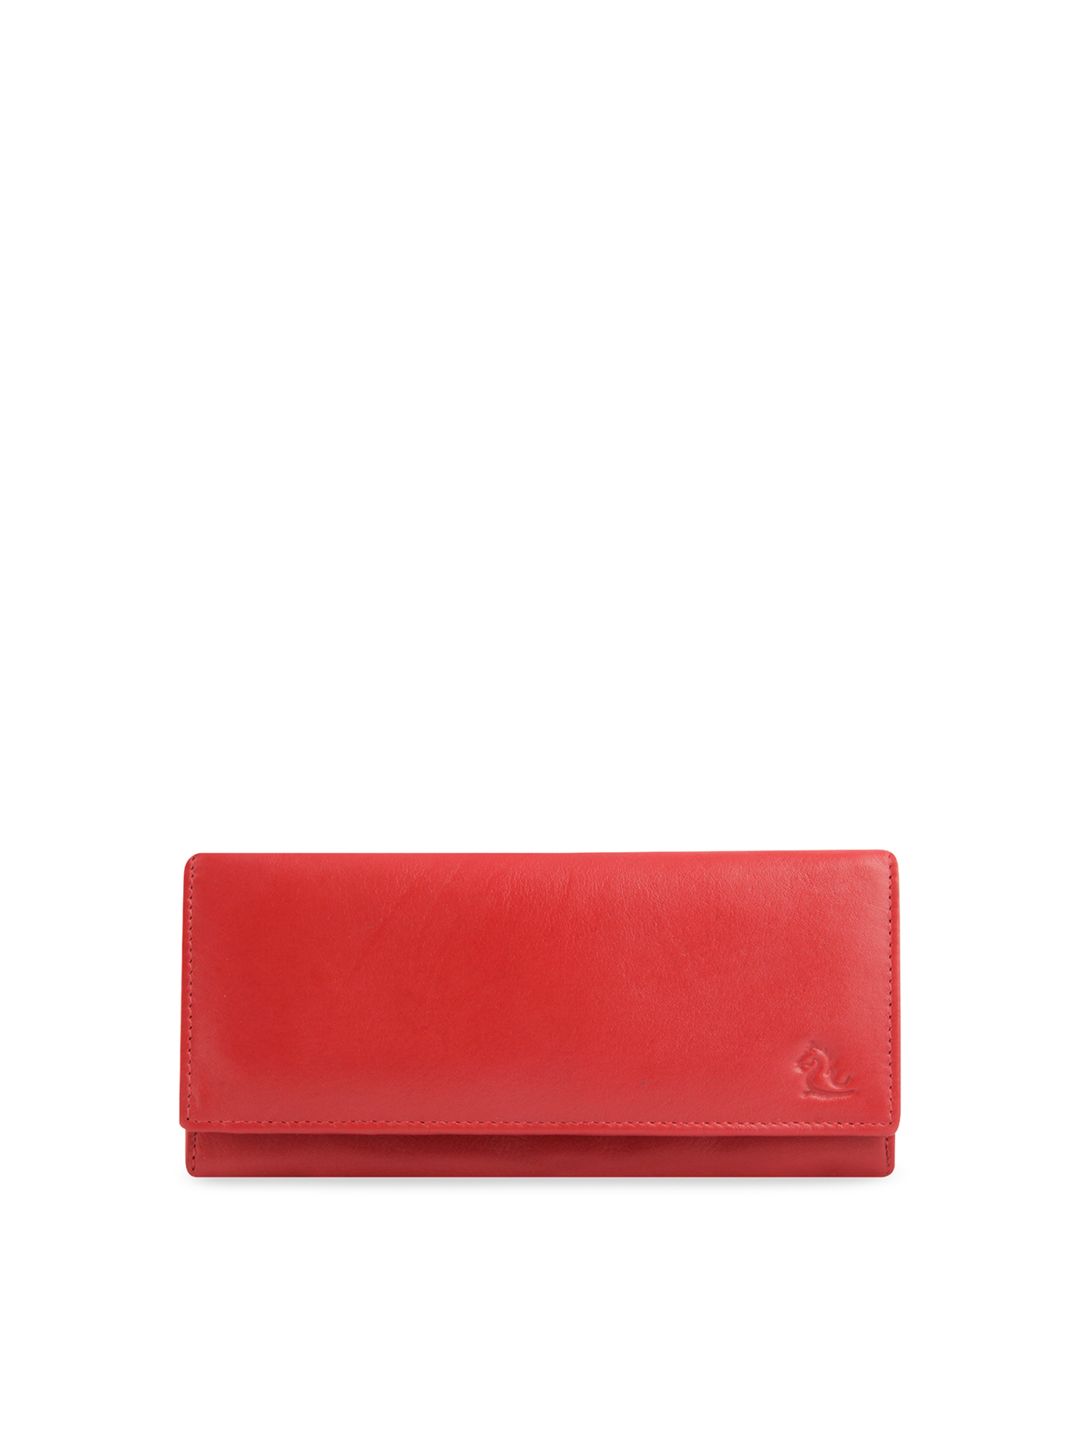 Kara Women Red Solid Two Fold Leather Wallet Price in India